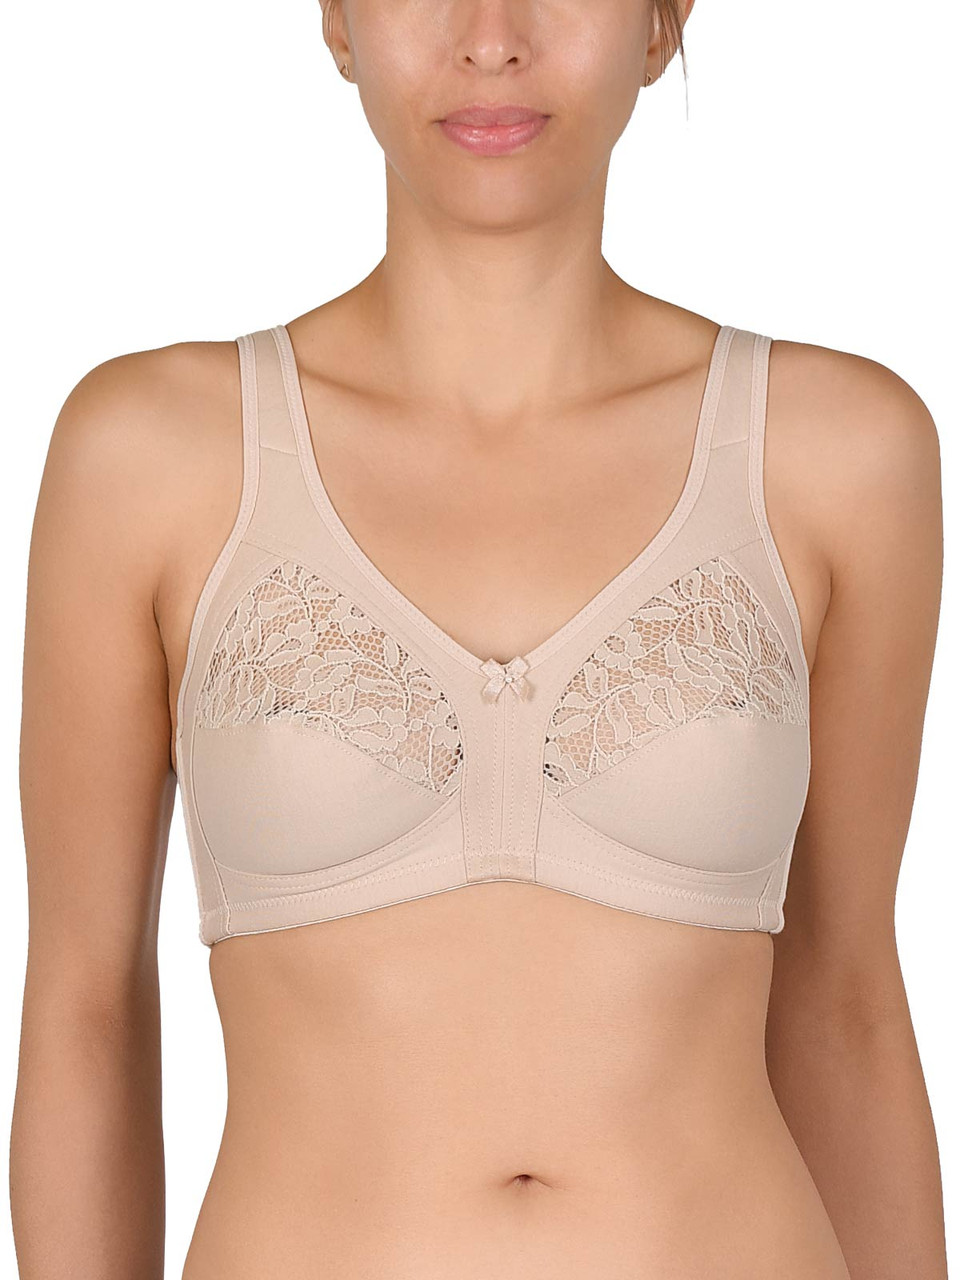 Naturana Wirefree Cotton Full Cup Bra with Lace inserts and side